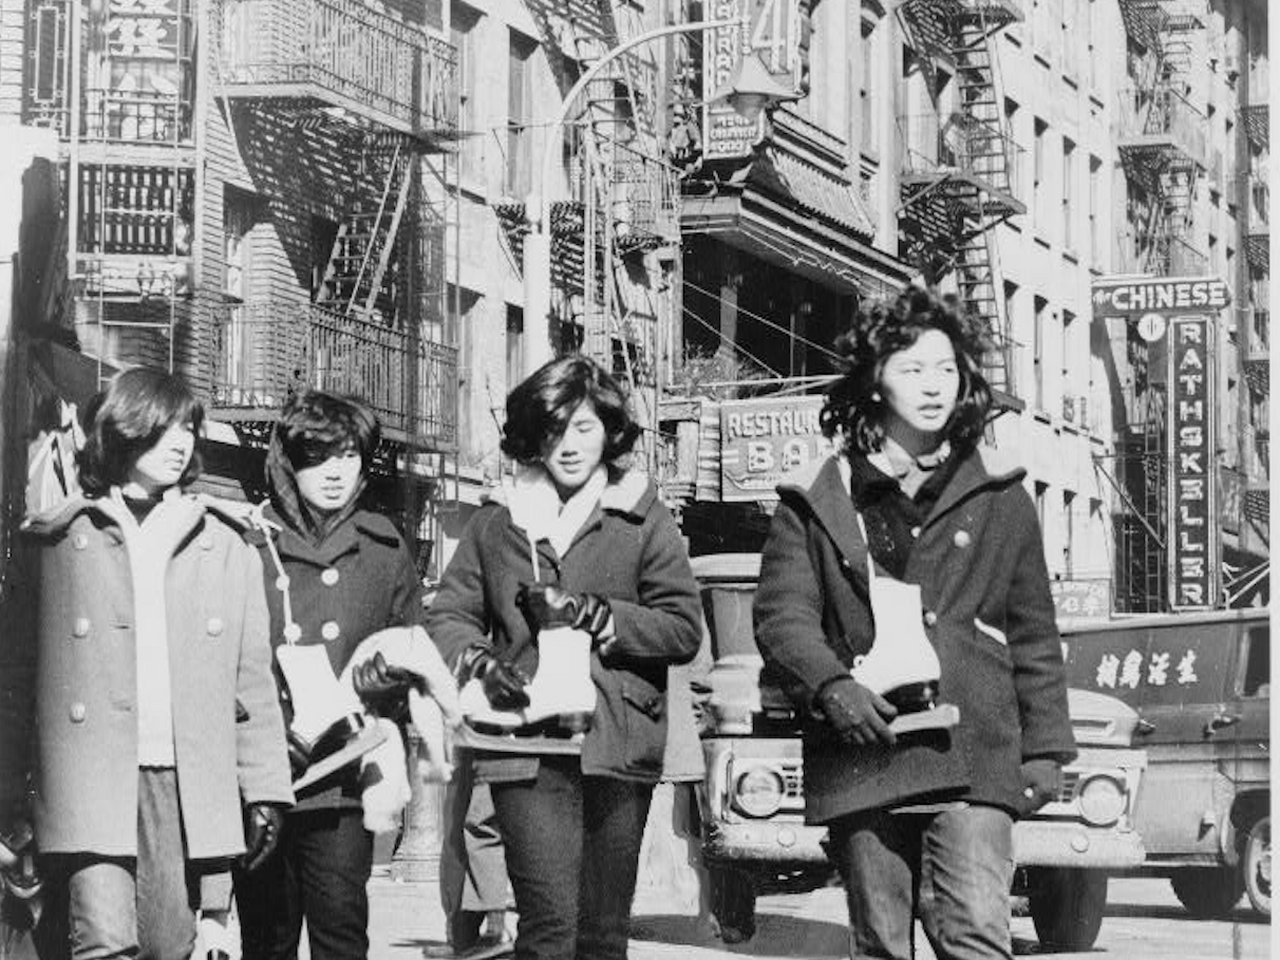 Four Chinese American girls carrying ice skates in Chinatown NYC